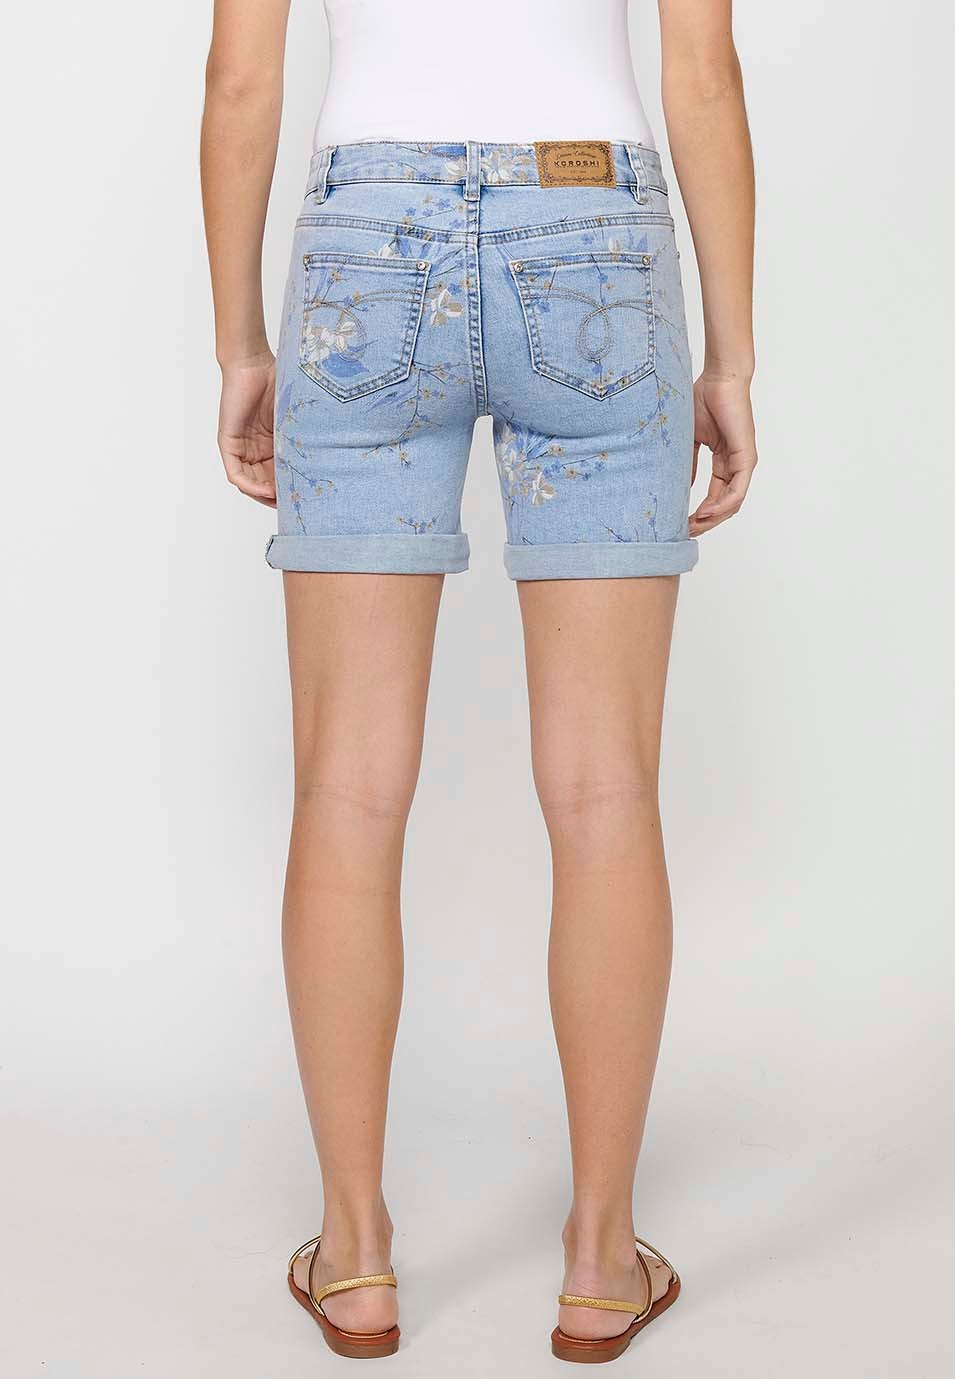 Shorts with a turn-up finish with zipper and button closure with a Blue floral print for Women 5